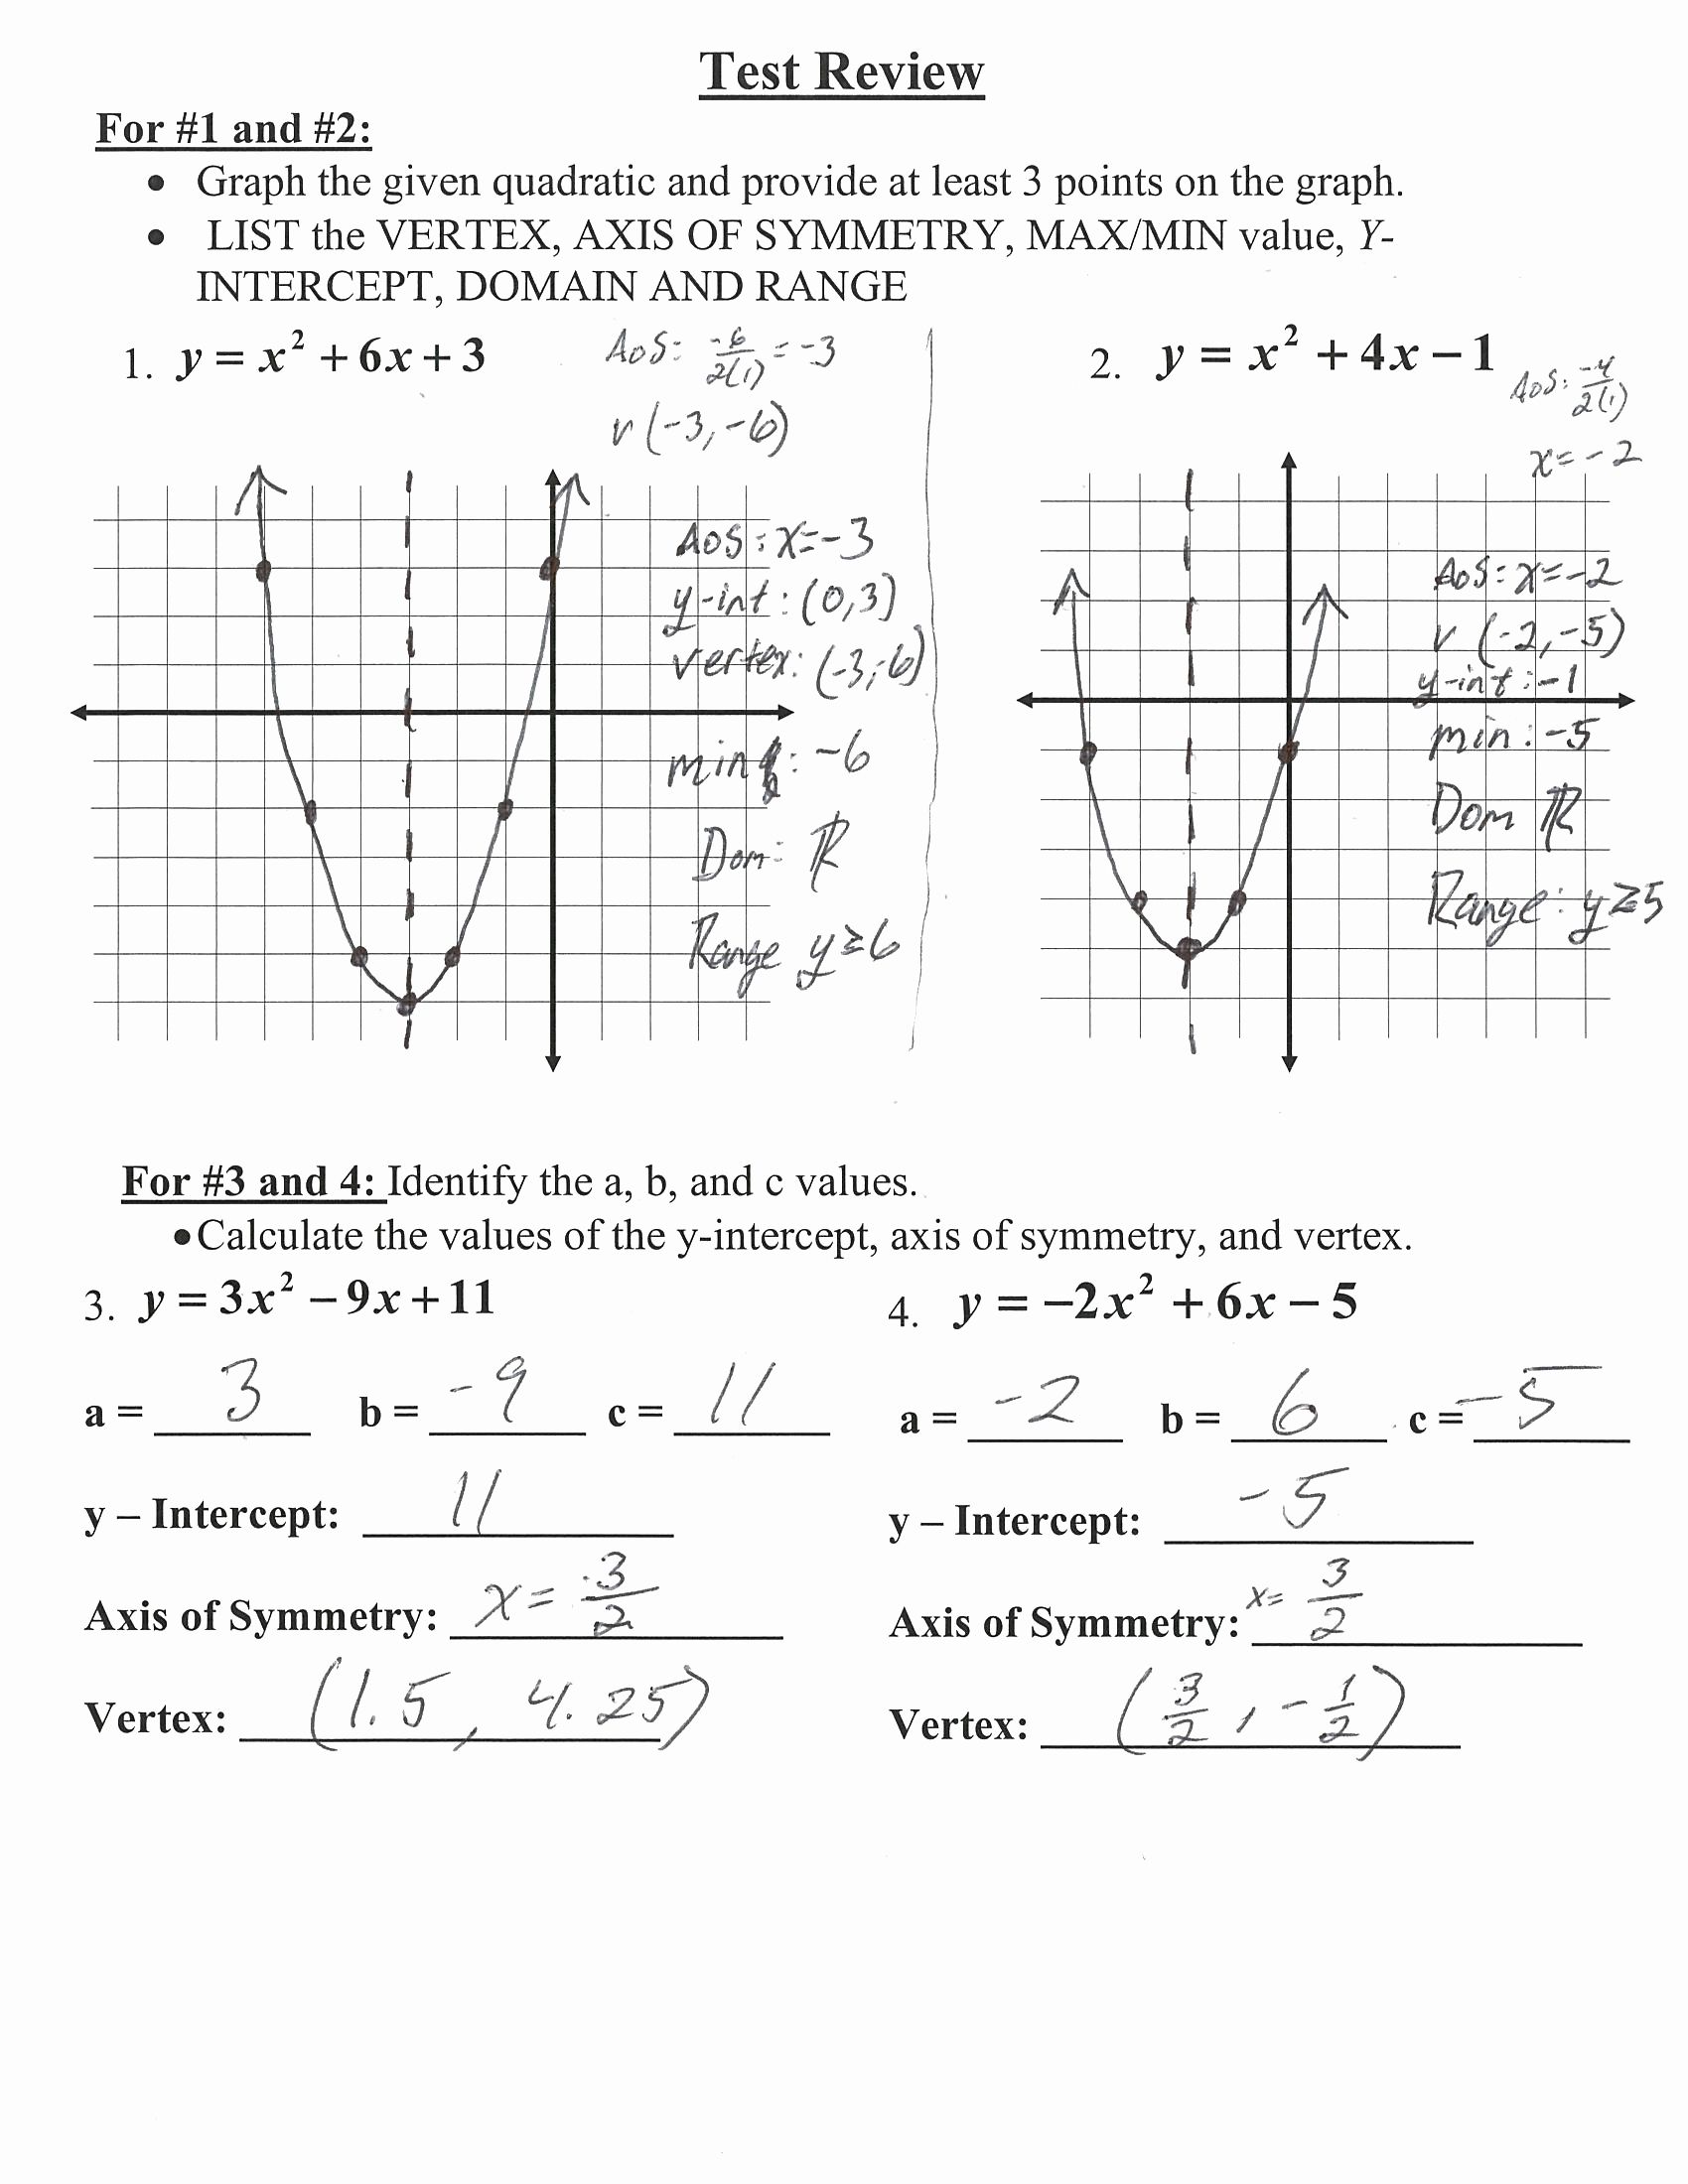 Domain and range worksheet inspirational unique stock graphing quadratic functions worksheet answers 1700x2200 Functions domain